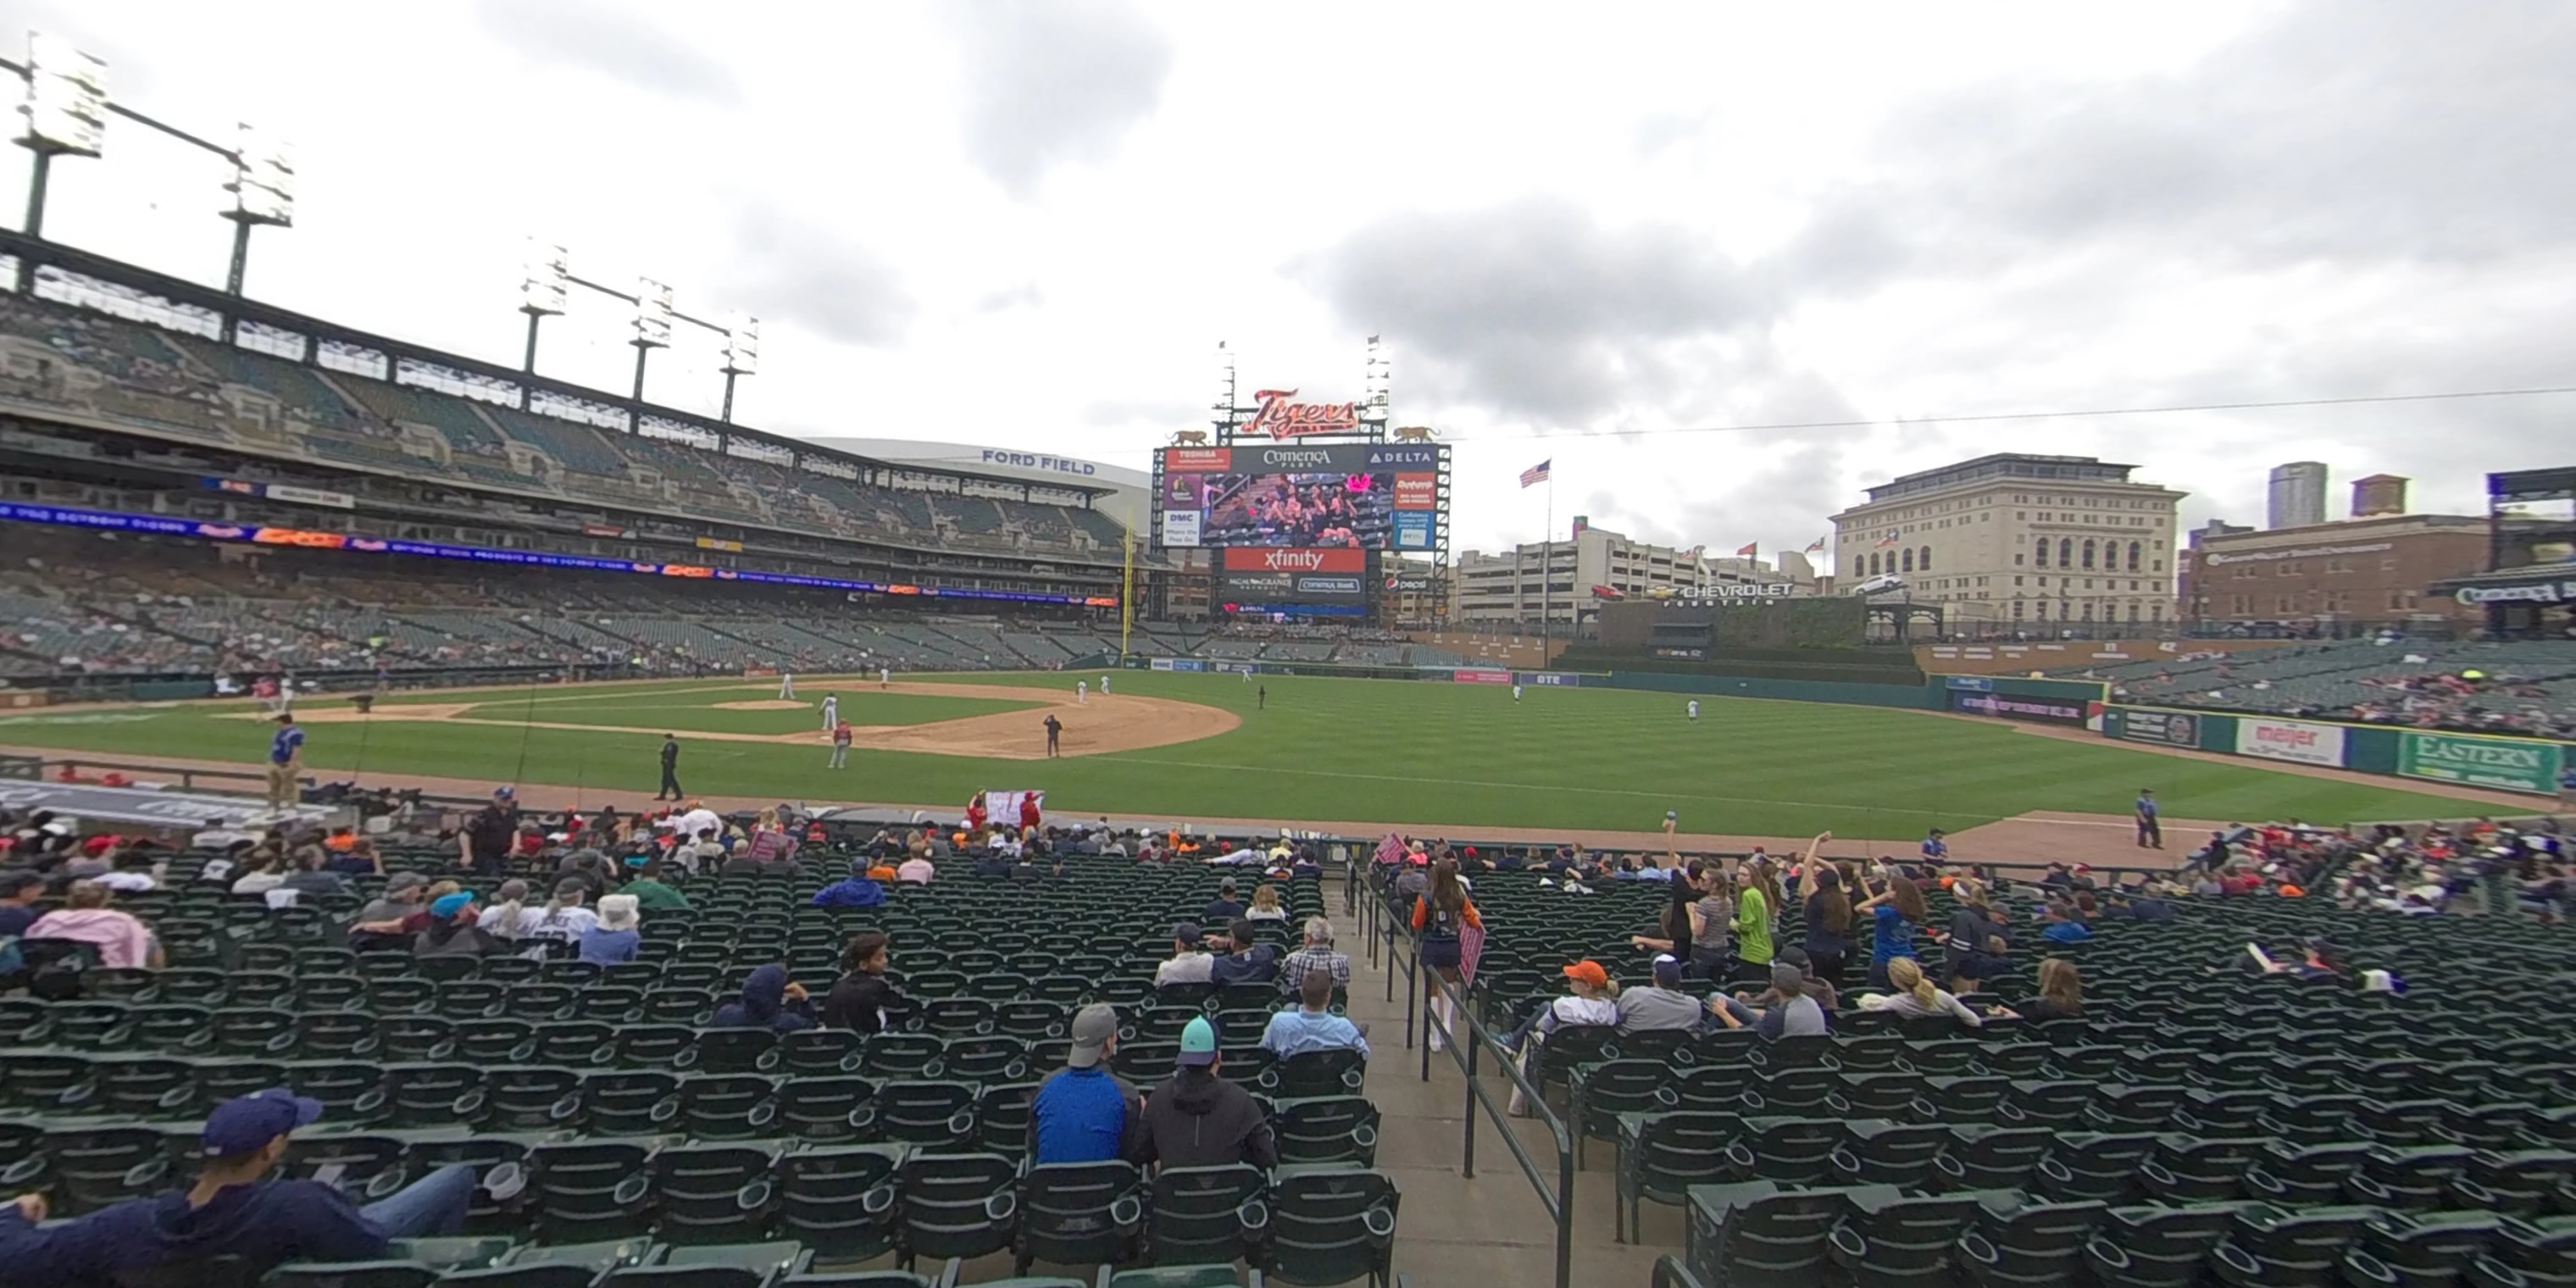 Section 115 at Comerica Park 